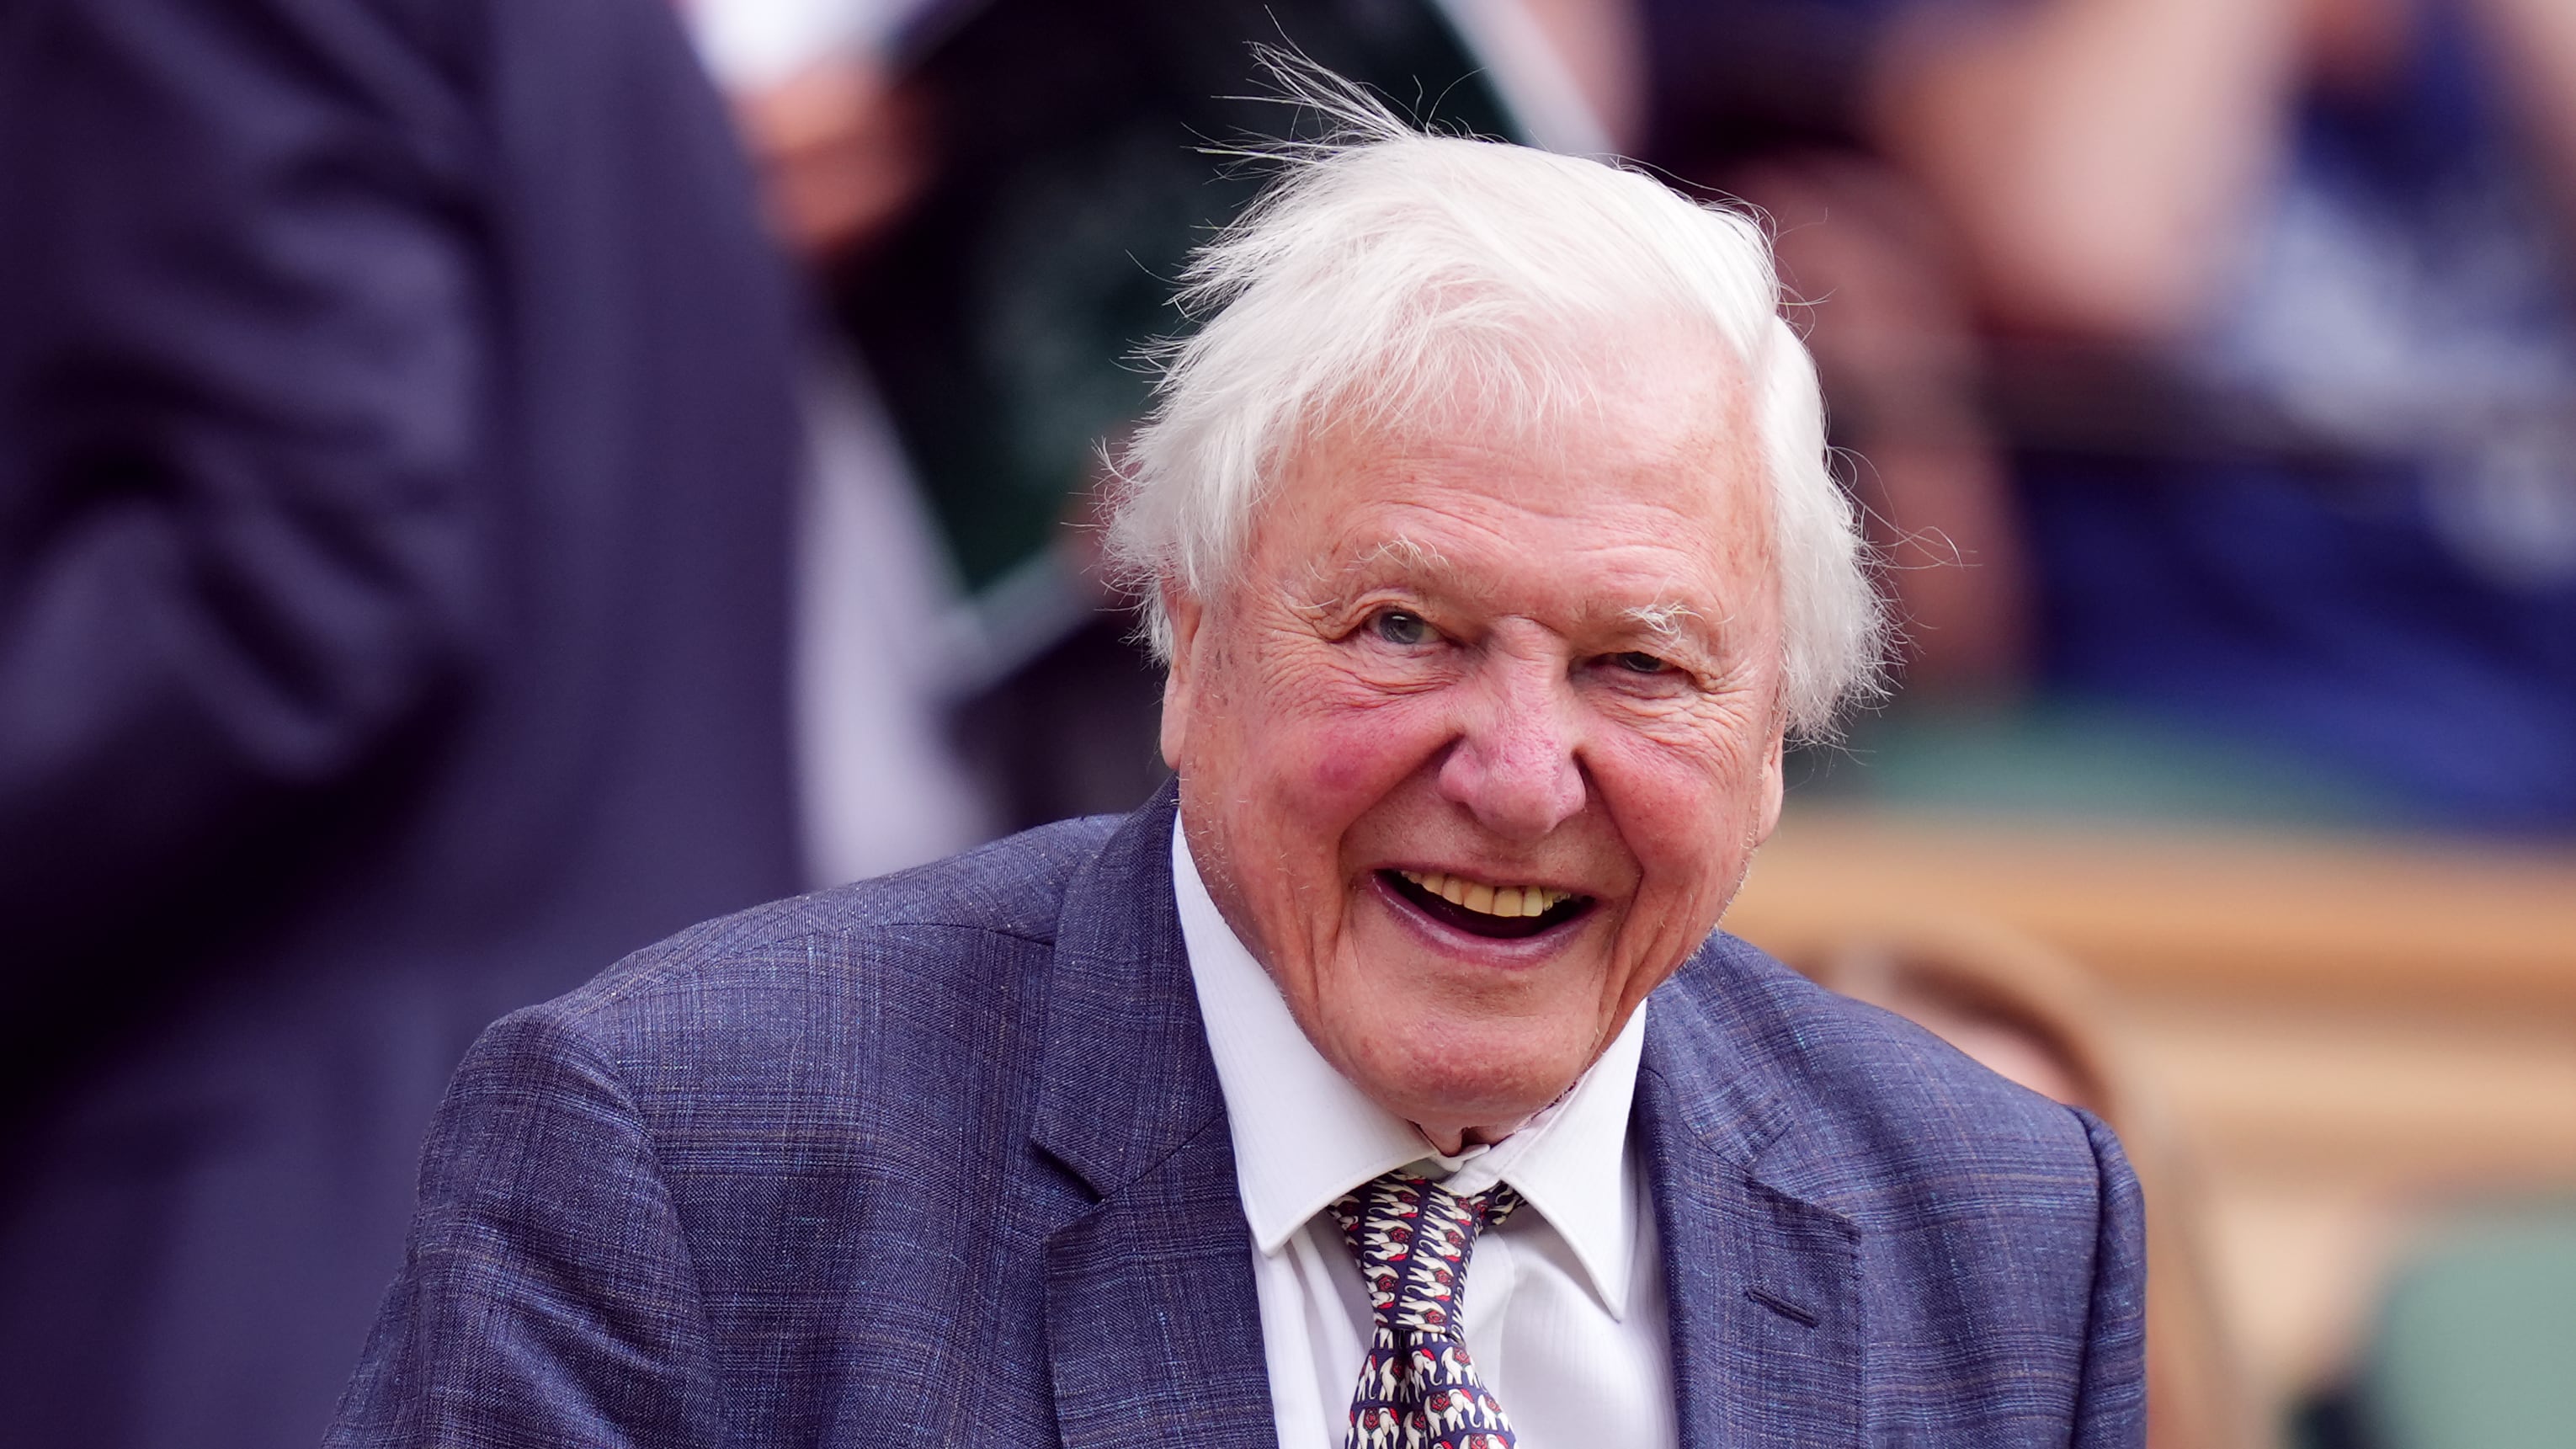 Sir David Attenborough appeared in good spirits as he arrived in the royal box on Centre Court on the first day of Wimbledon